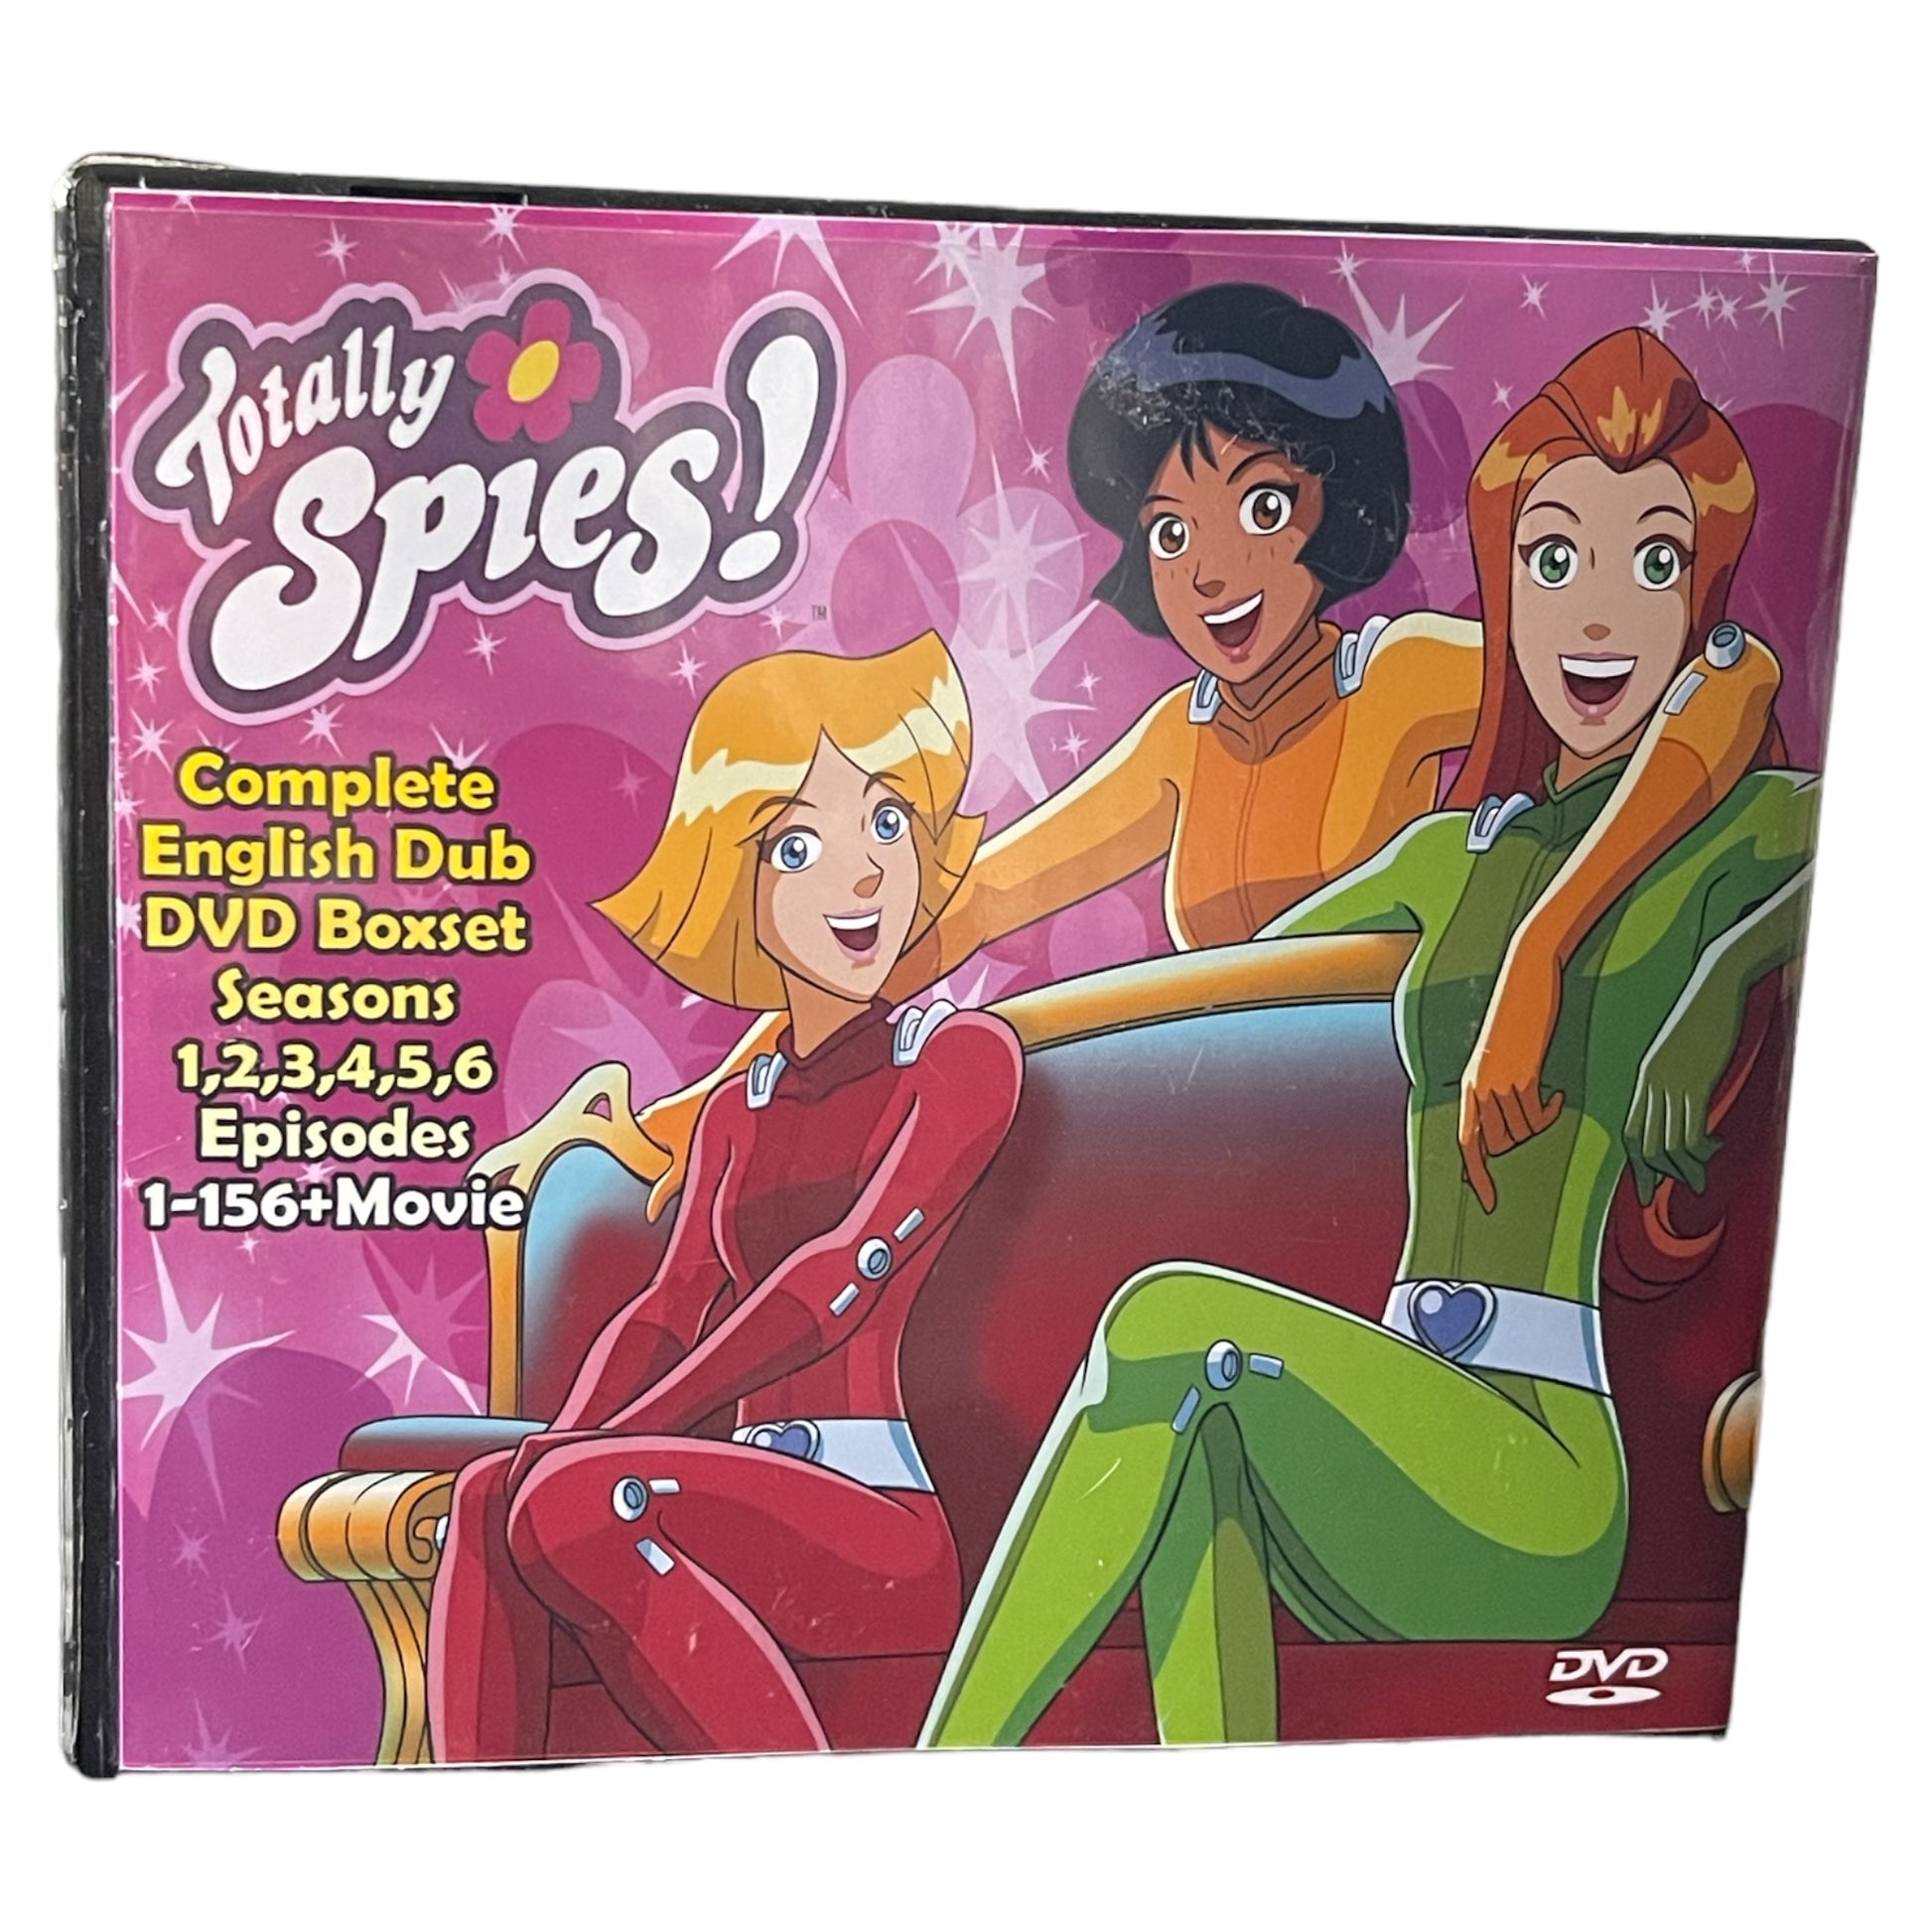 Totally Spies Complete Series Seasons 1 2 3 4 5 6 + Movie DVD - RetroAnimation 